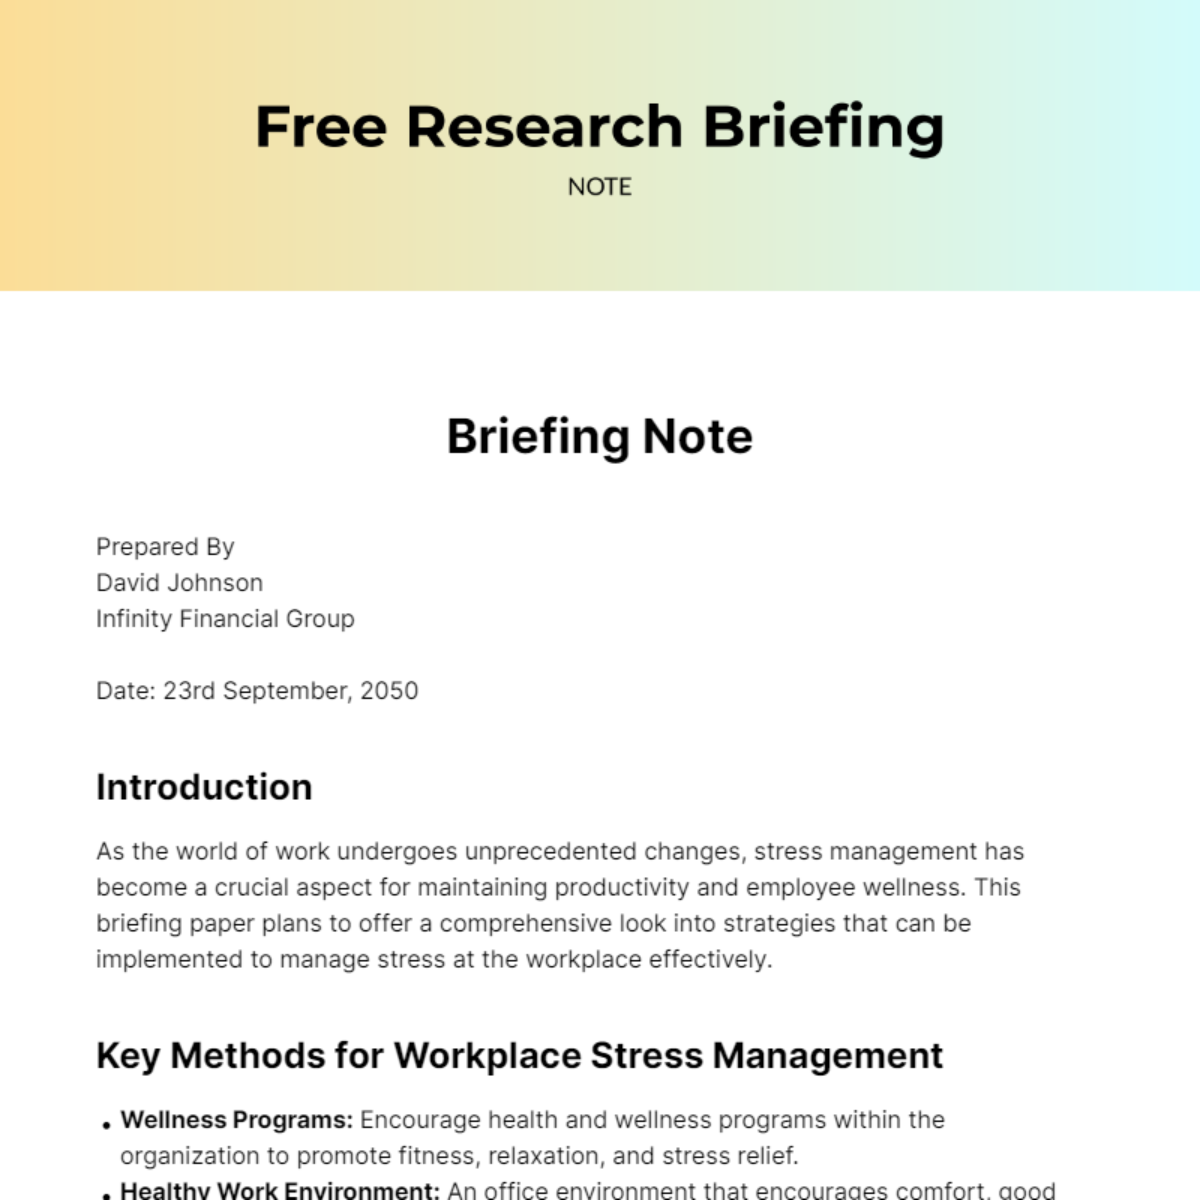 Research Briefing Note Template